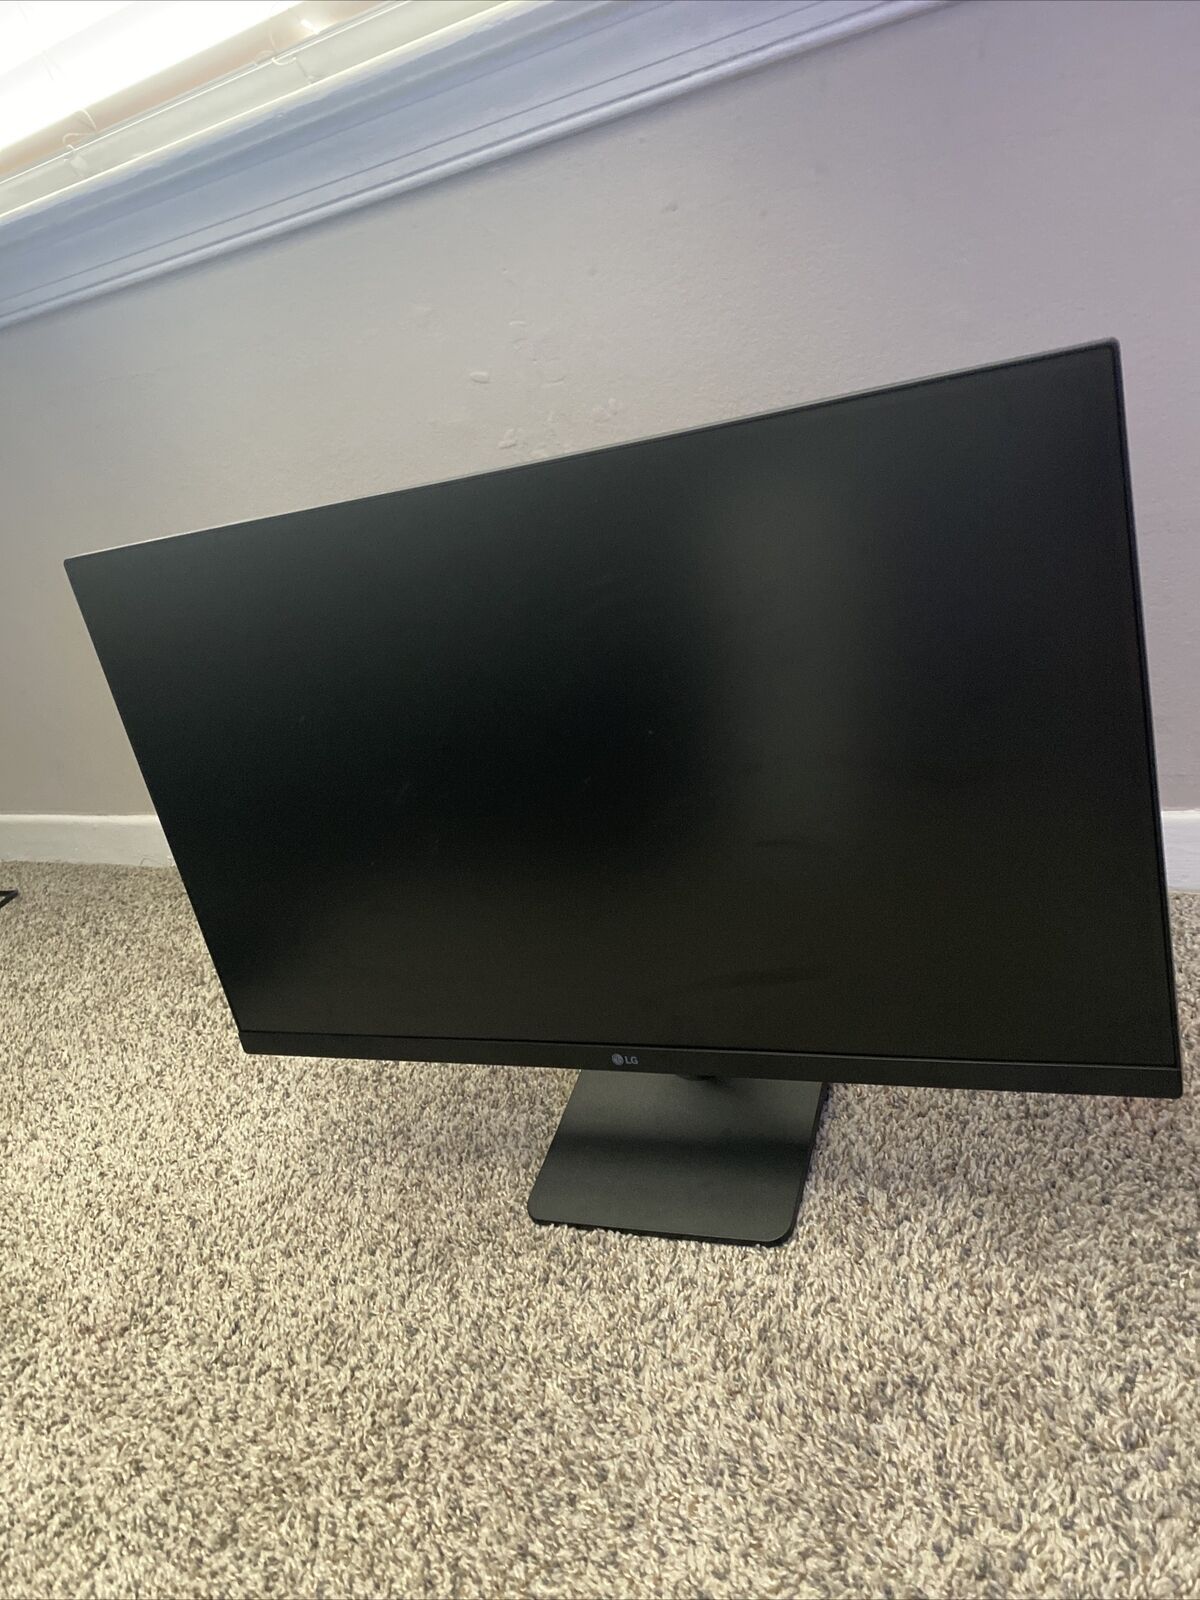 LG 27MP40W-B 27 in Widescreen IPS LCD Monitor (Perfect Condition)